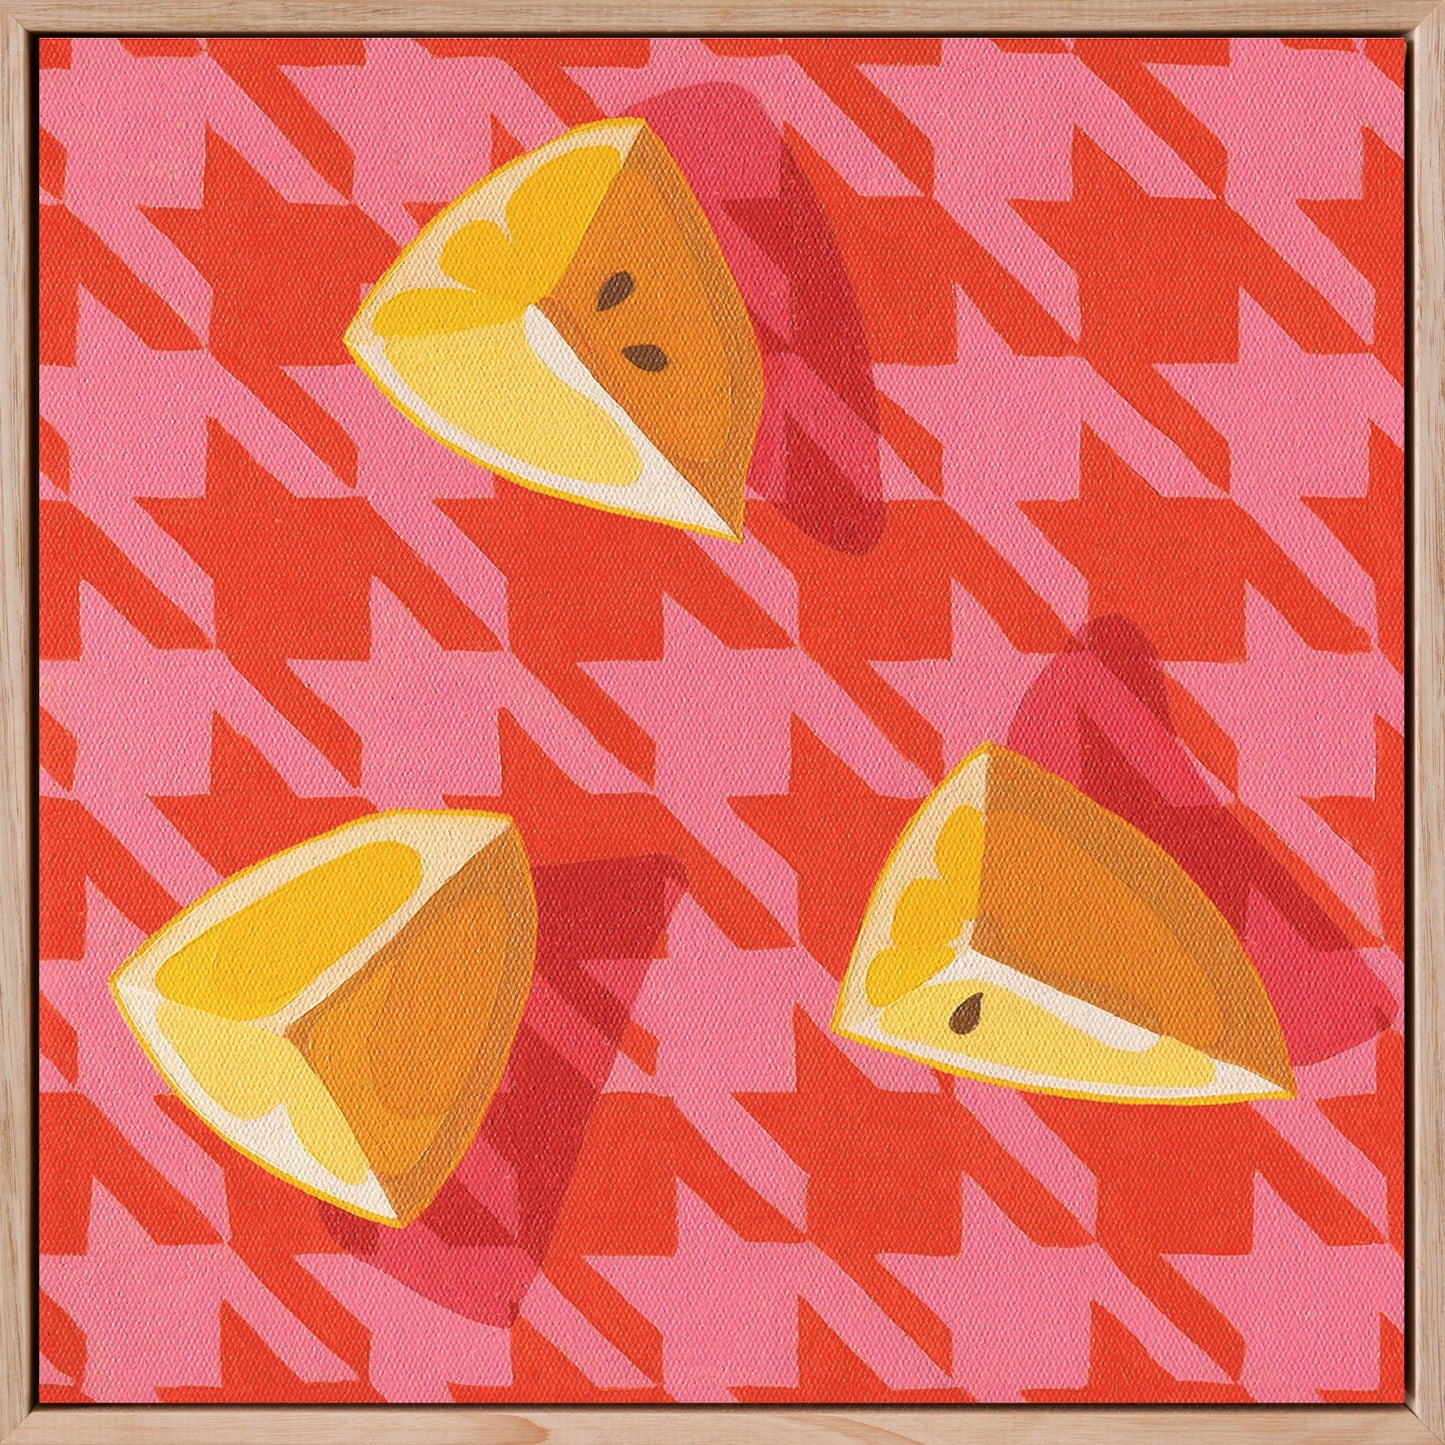 fine art framed canvas print of an original oil painting of three wedges of lemon on a pink and red houndstooth background